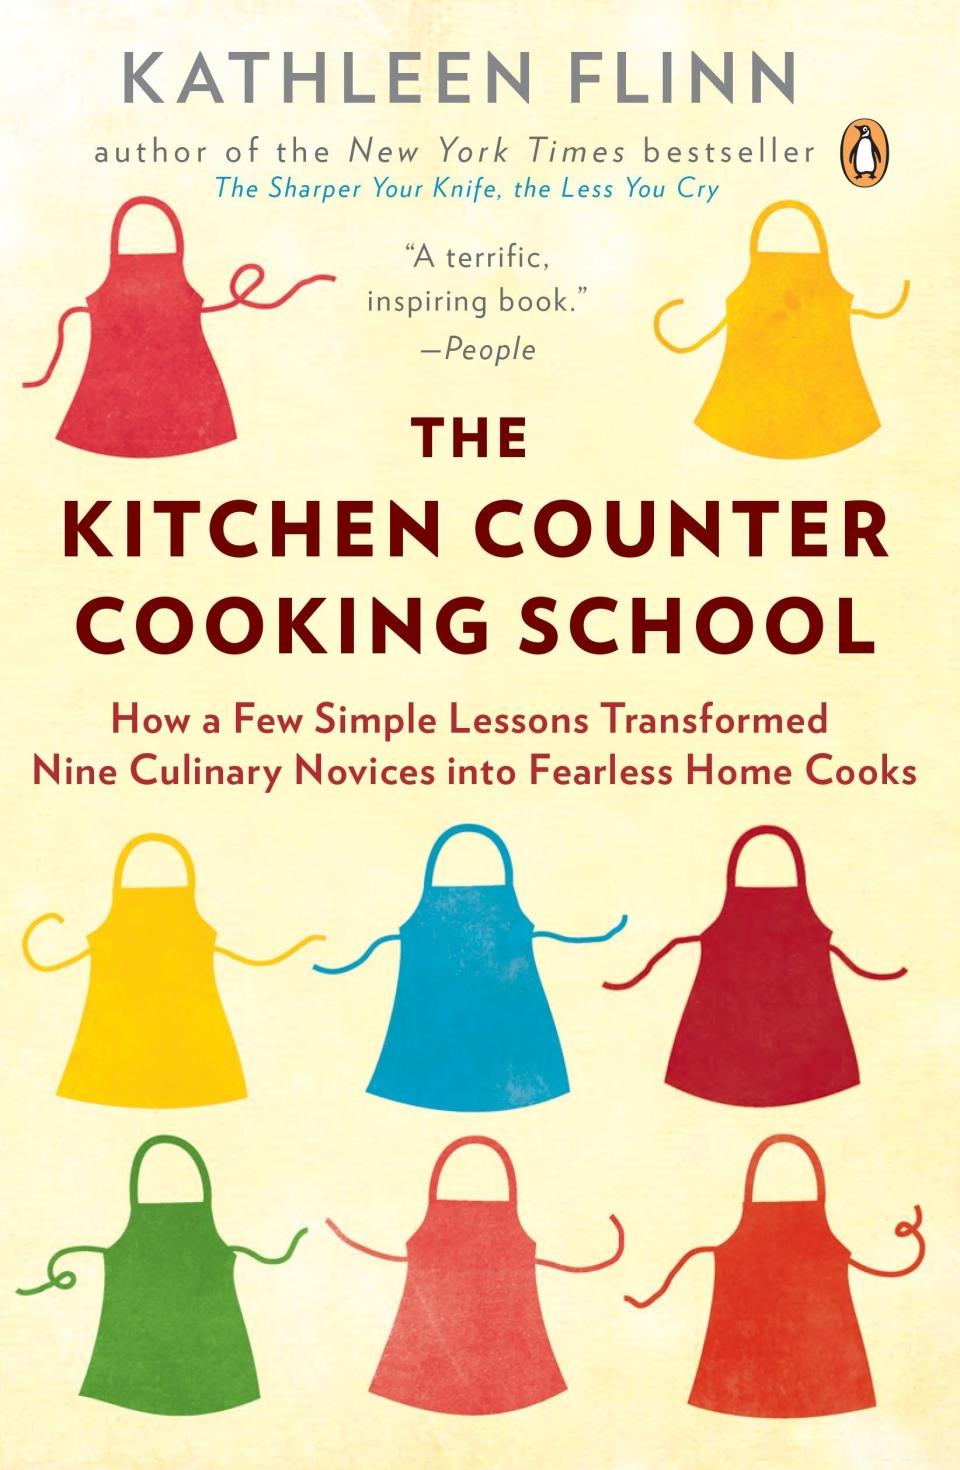 Fresh out of culinary school in France, Kathleen Flinn was unsure where to go next in her culinary journey — until she stumbled into a woman stocking her shopping cart with processed foods. After convincing the woman to try fresh ingredients, Flinn realized she was on to something. In this memoir, she shares her passion for teaching others to cook well, and how she’s helped nine other people find their inner cook.Get it from Bookshop or through your indie bookstore through Indiebound here. 